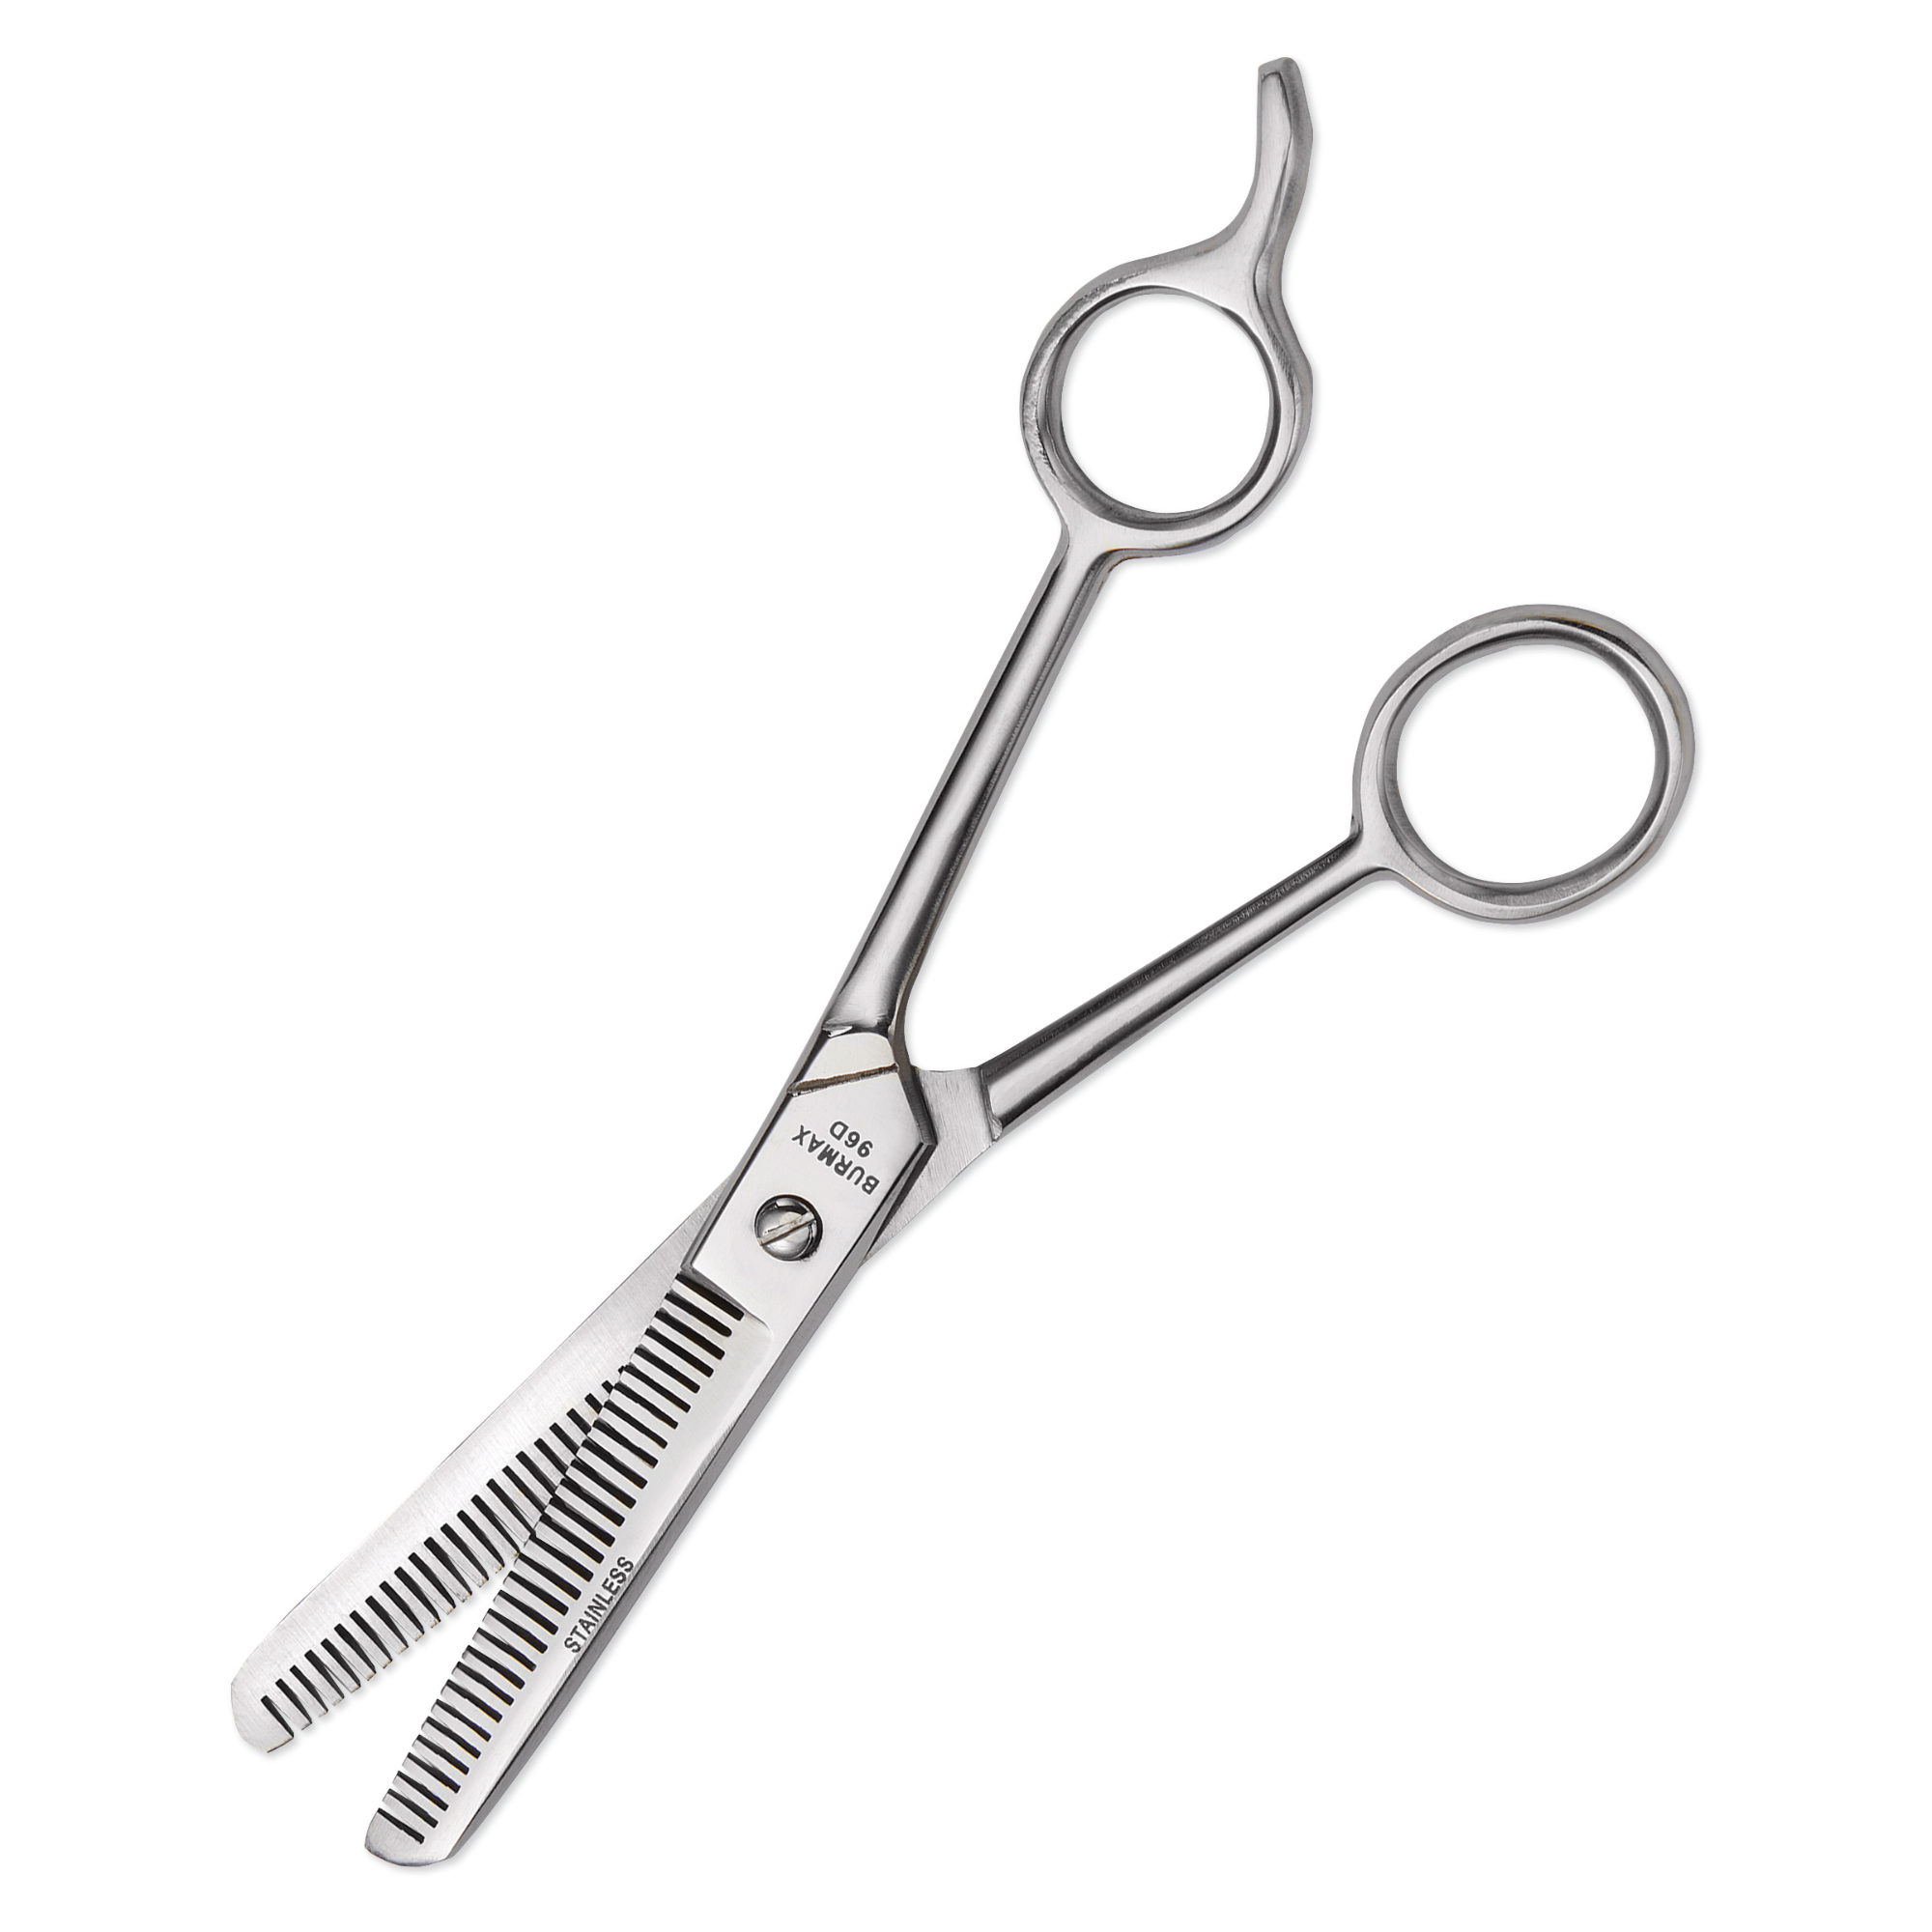 7" Double Tooth Thinning Shear